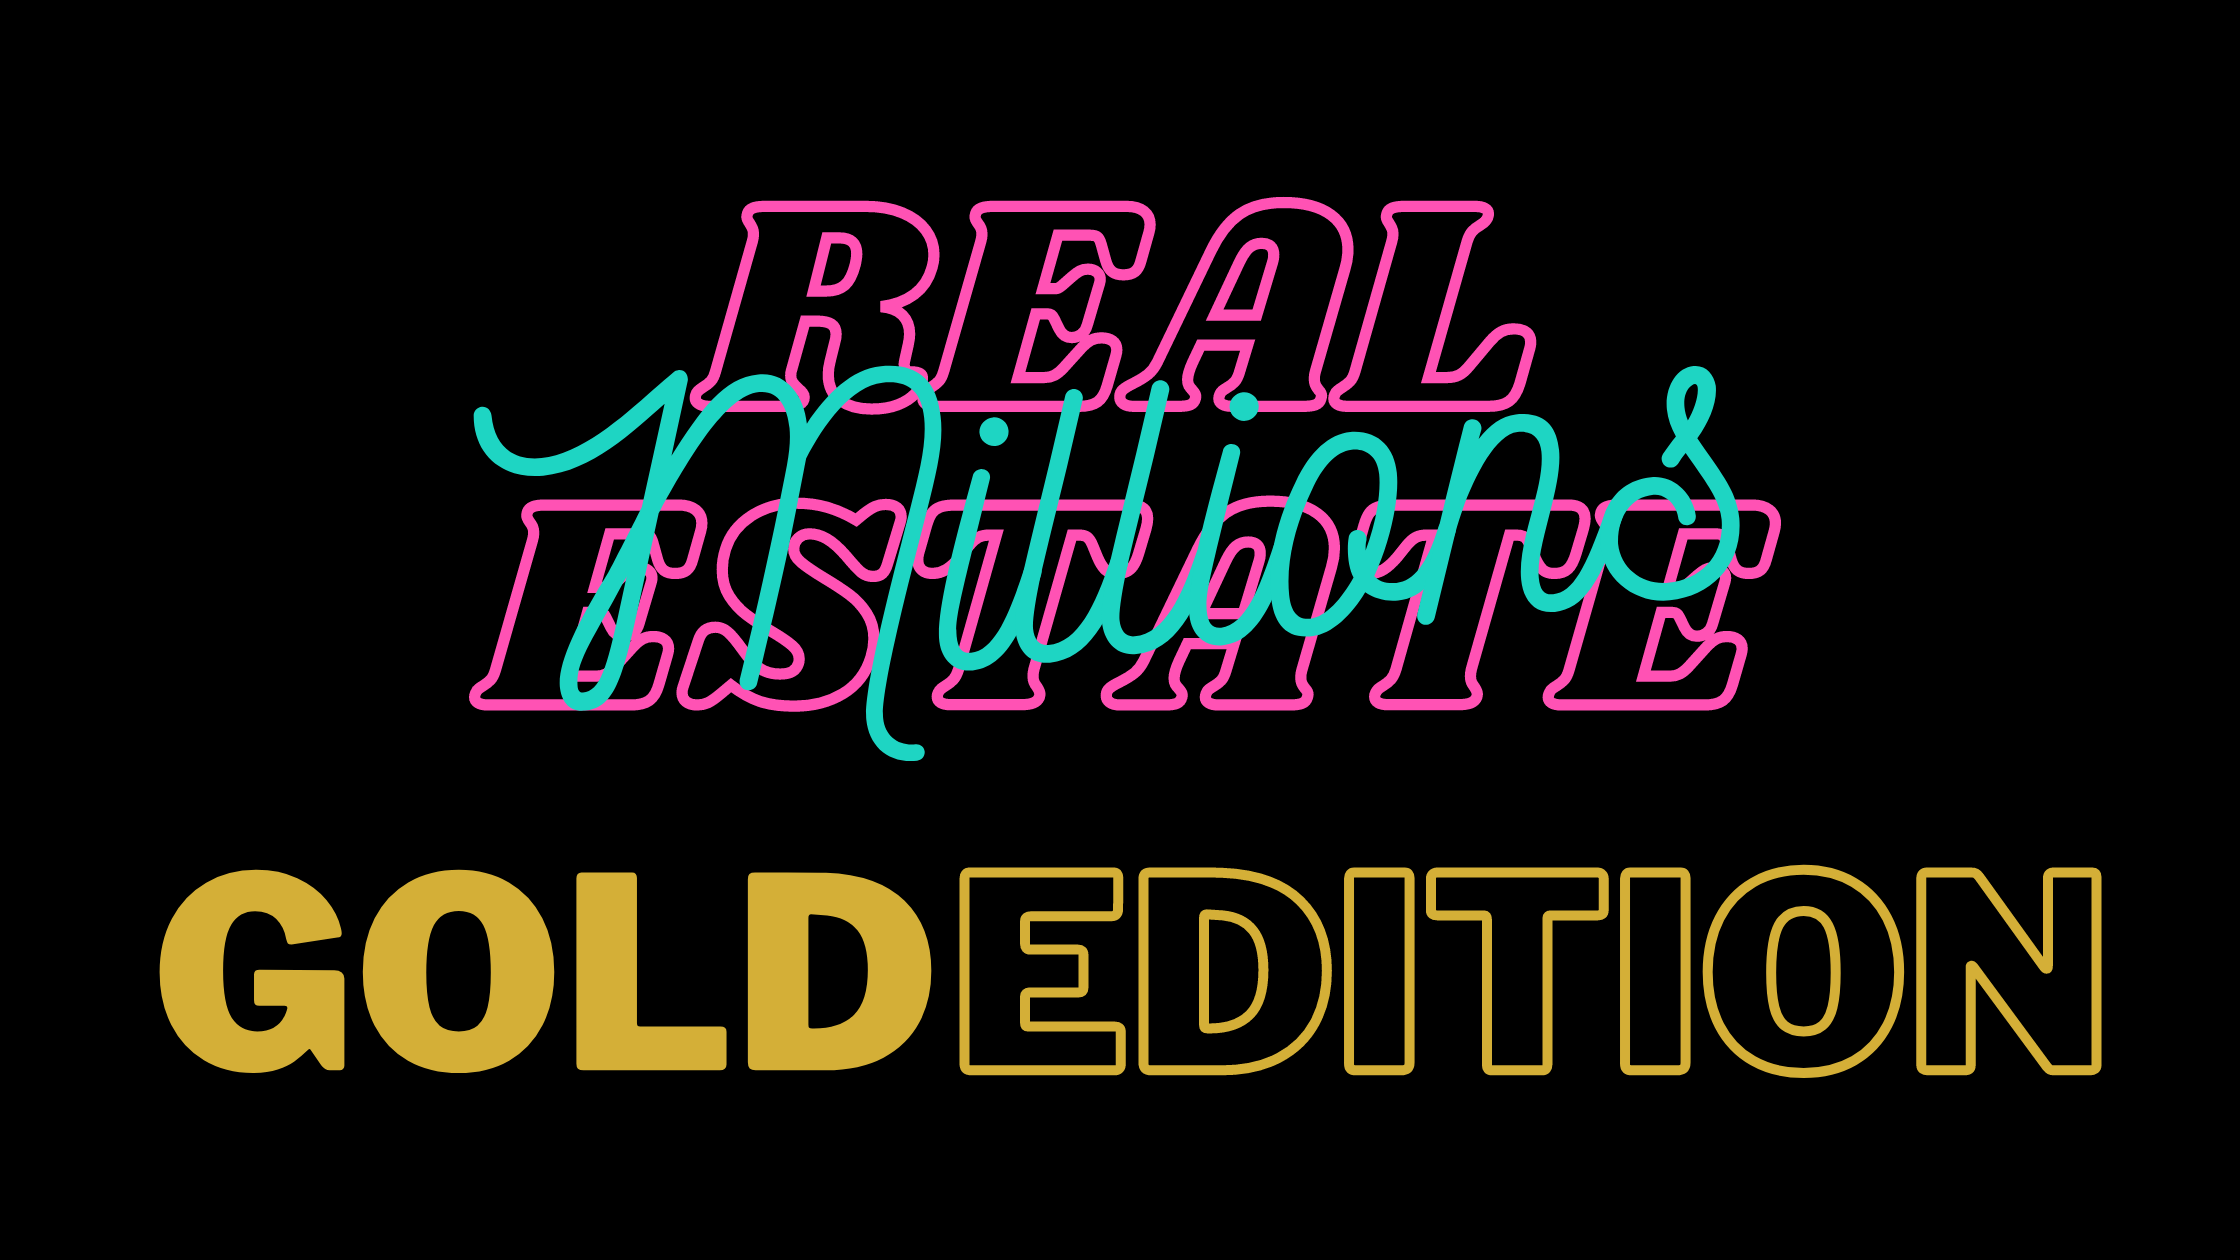 Real Estate Millions (Gold Edition)